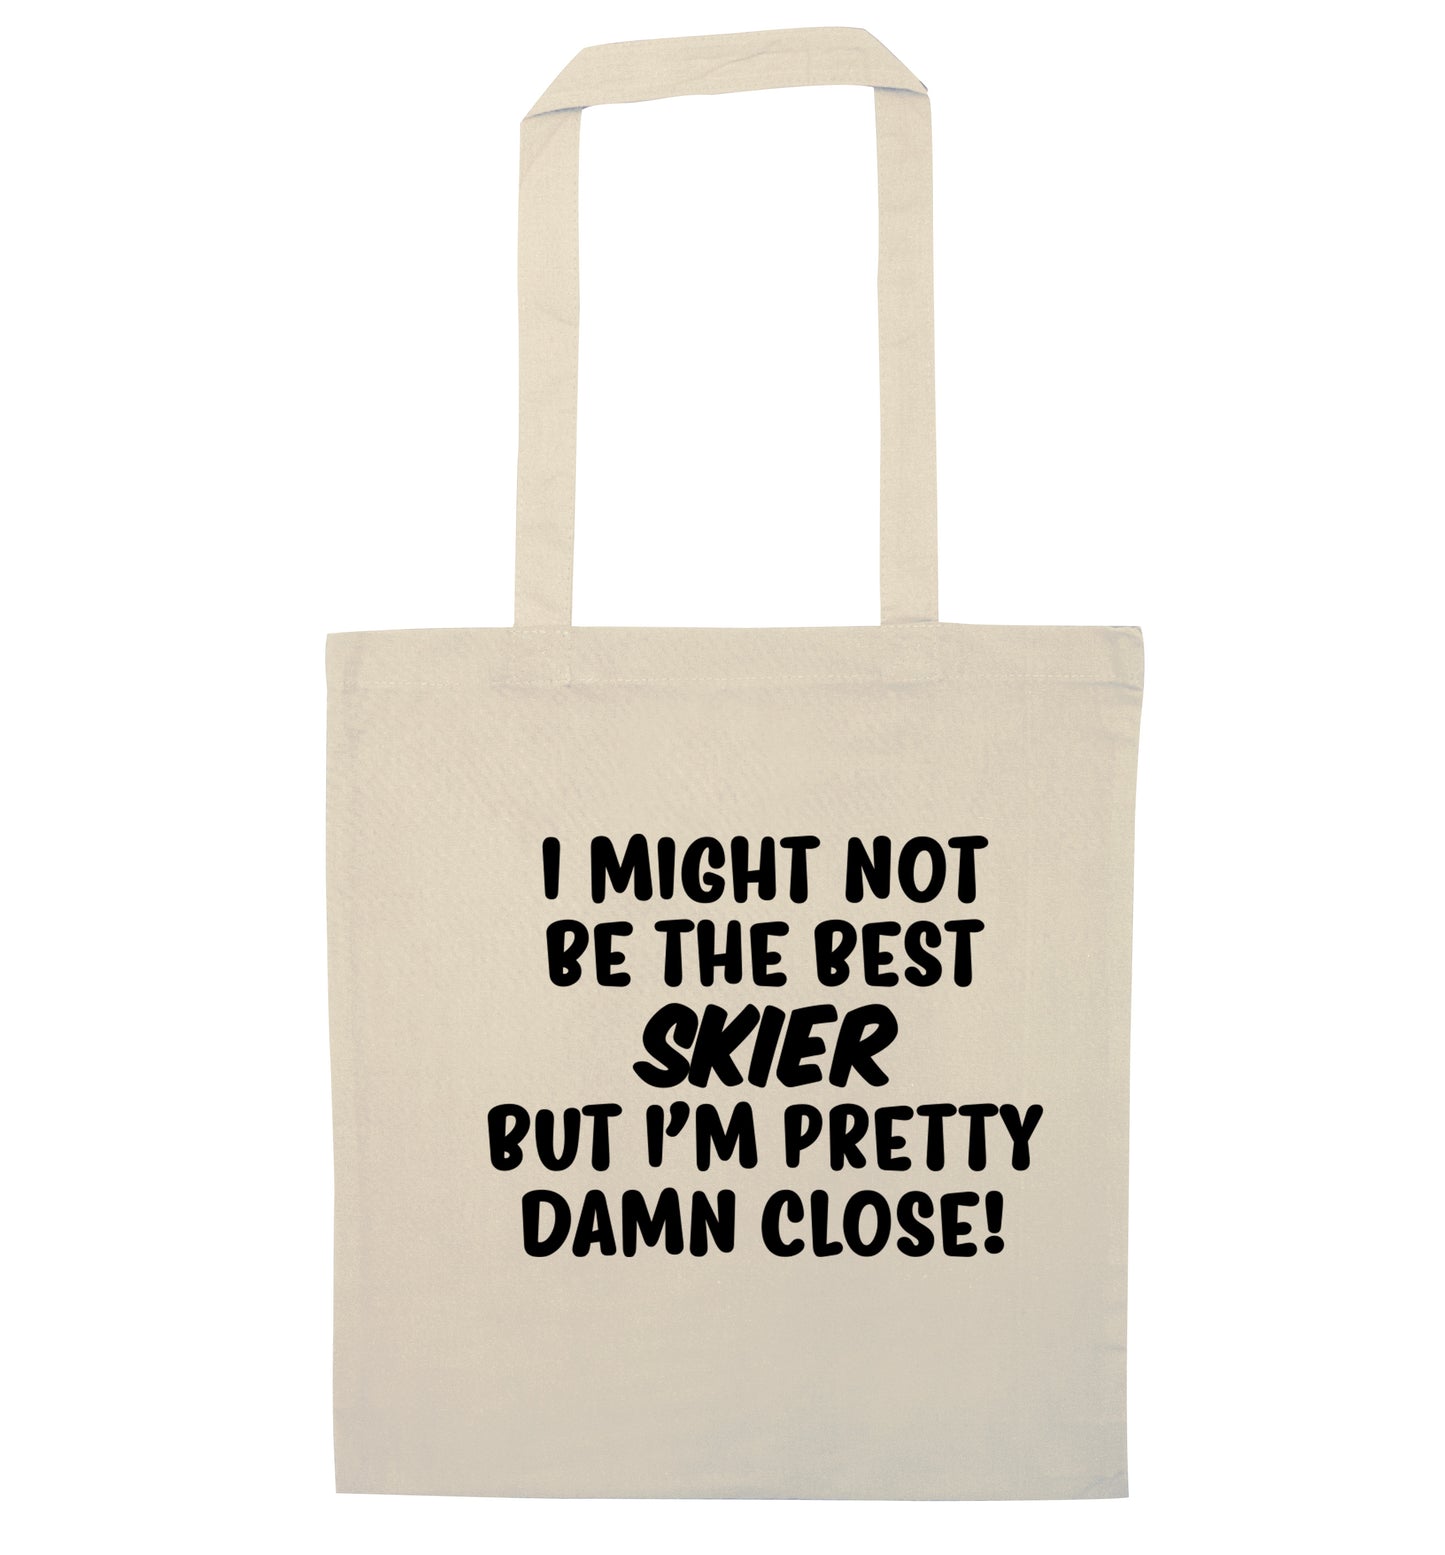 I might not be the best skier but I'm pretty damn close! natural tote bag